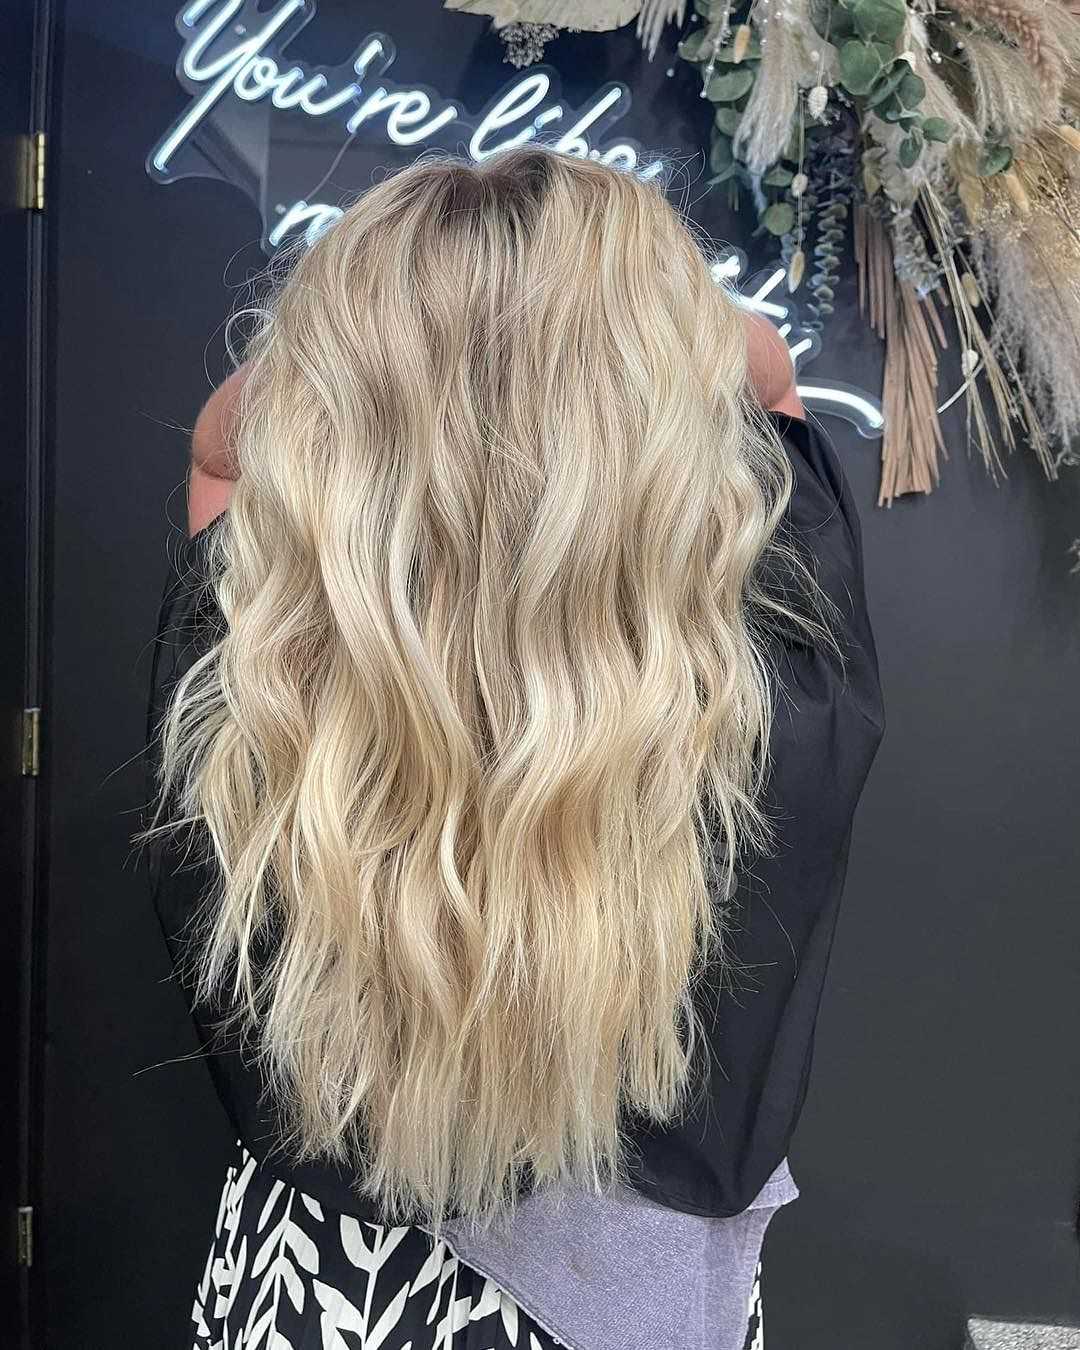 Blonde wavy hairstyle showcased against a dark backdrop with text decor.